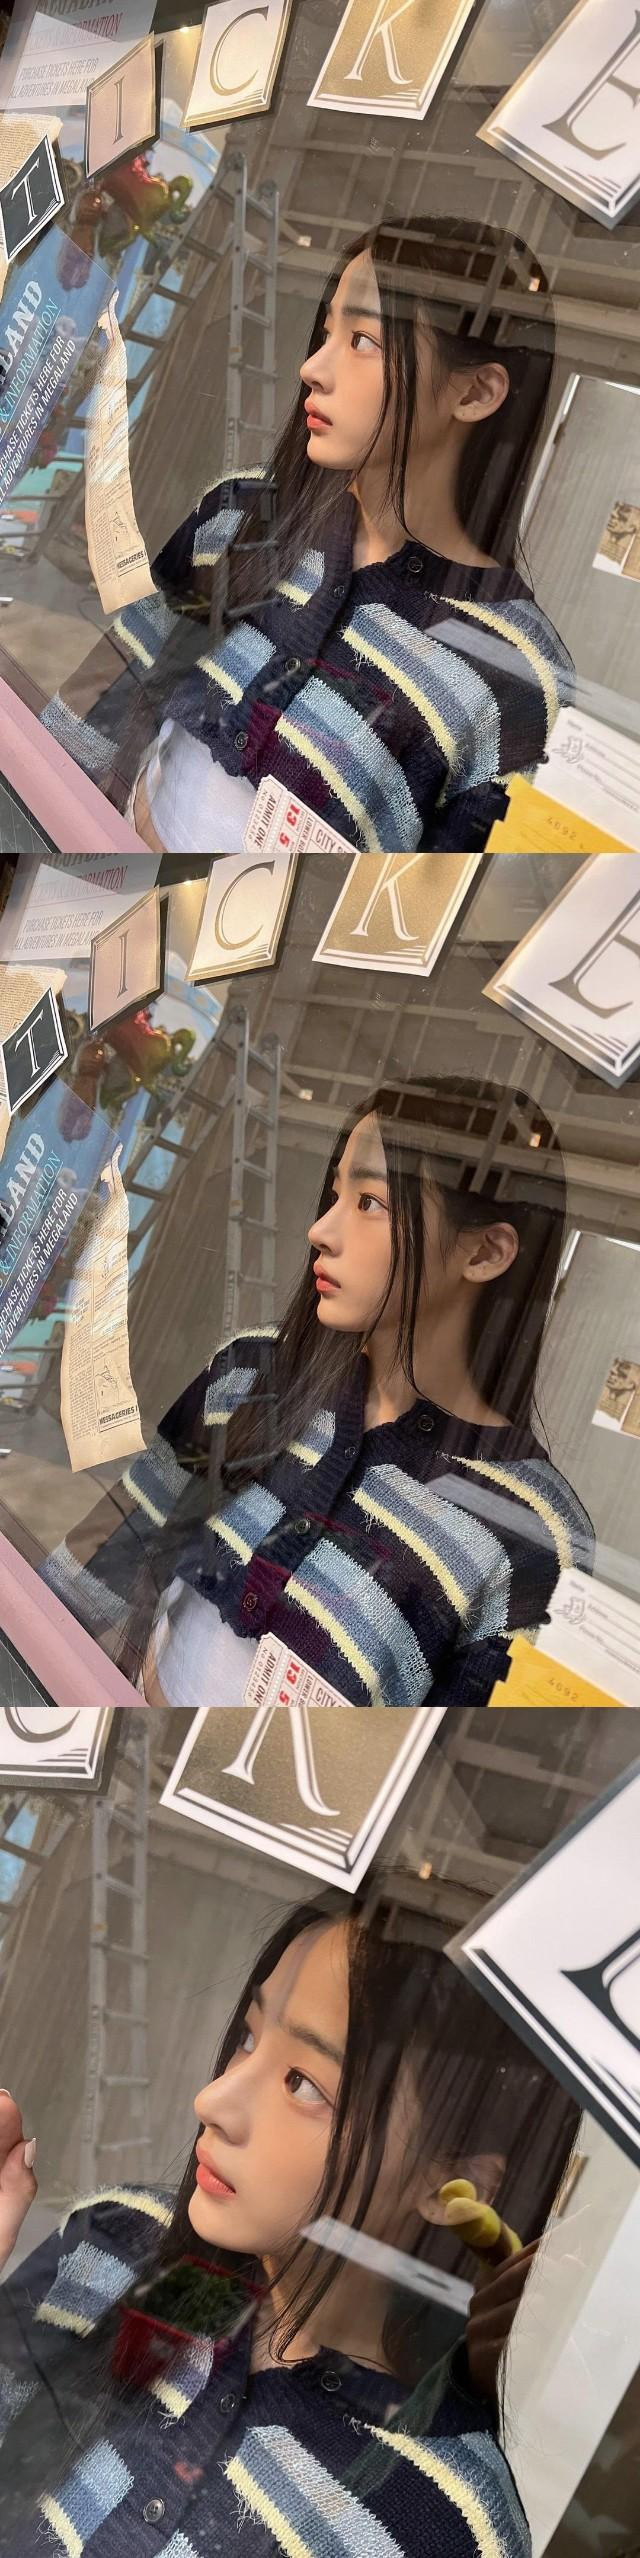 MINJI's perfect nose. From the side